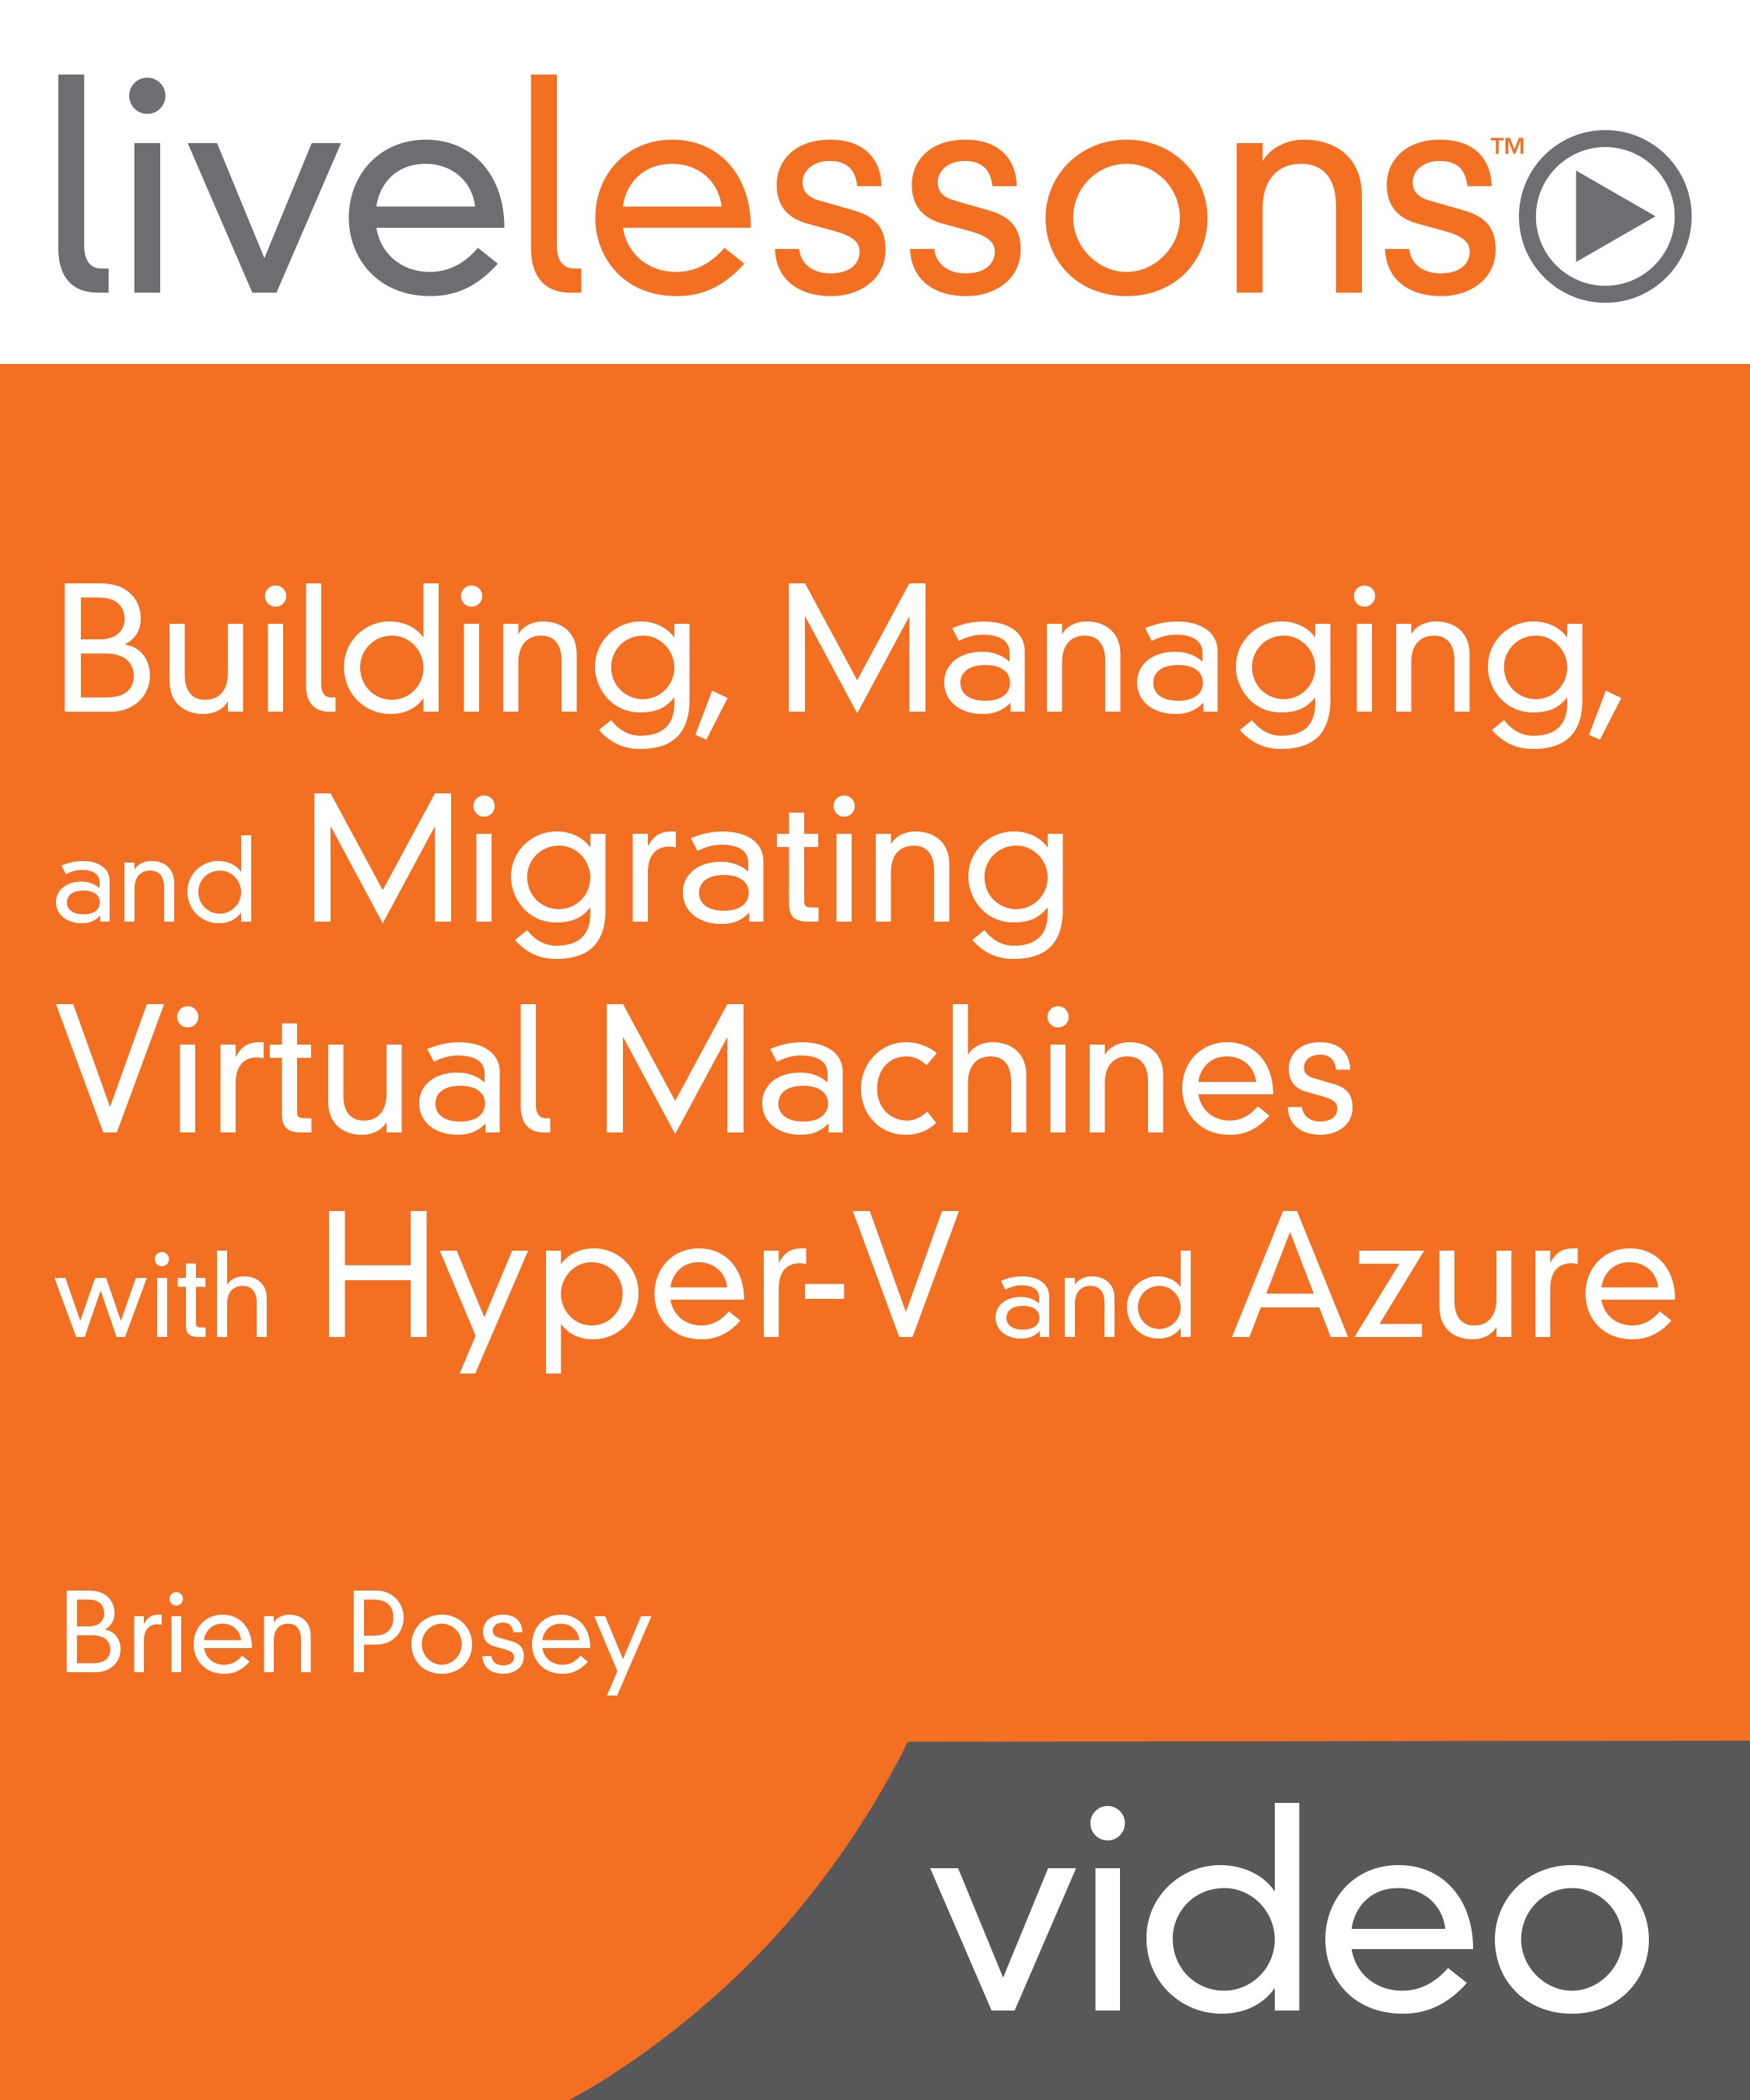 Building, Managing, and Migrating Virtual Machines with Hyper-V and Azure LiveLessons (Video Training)